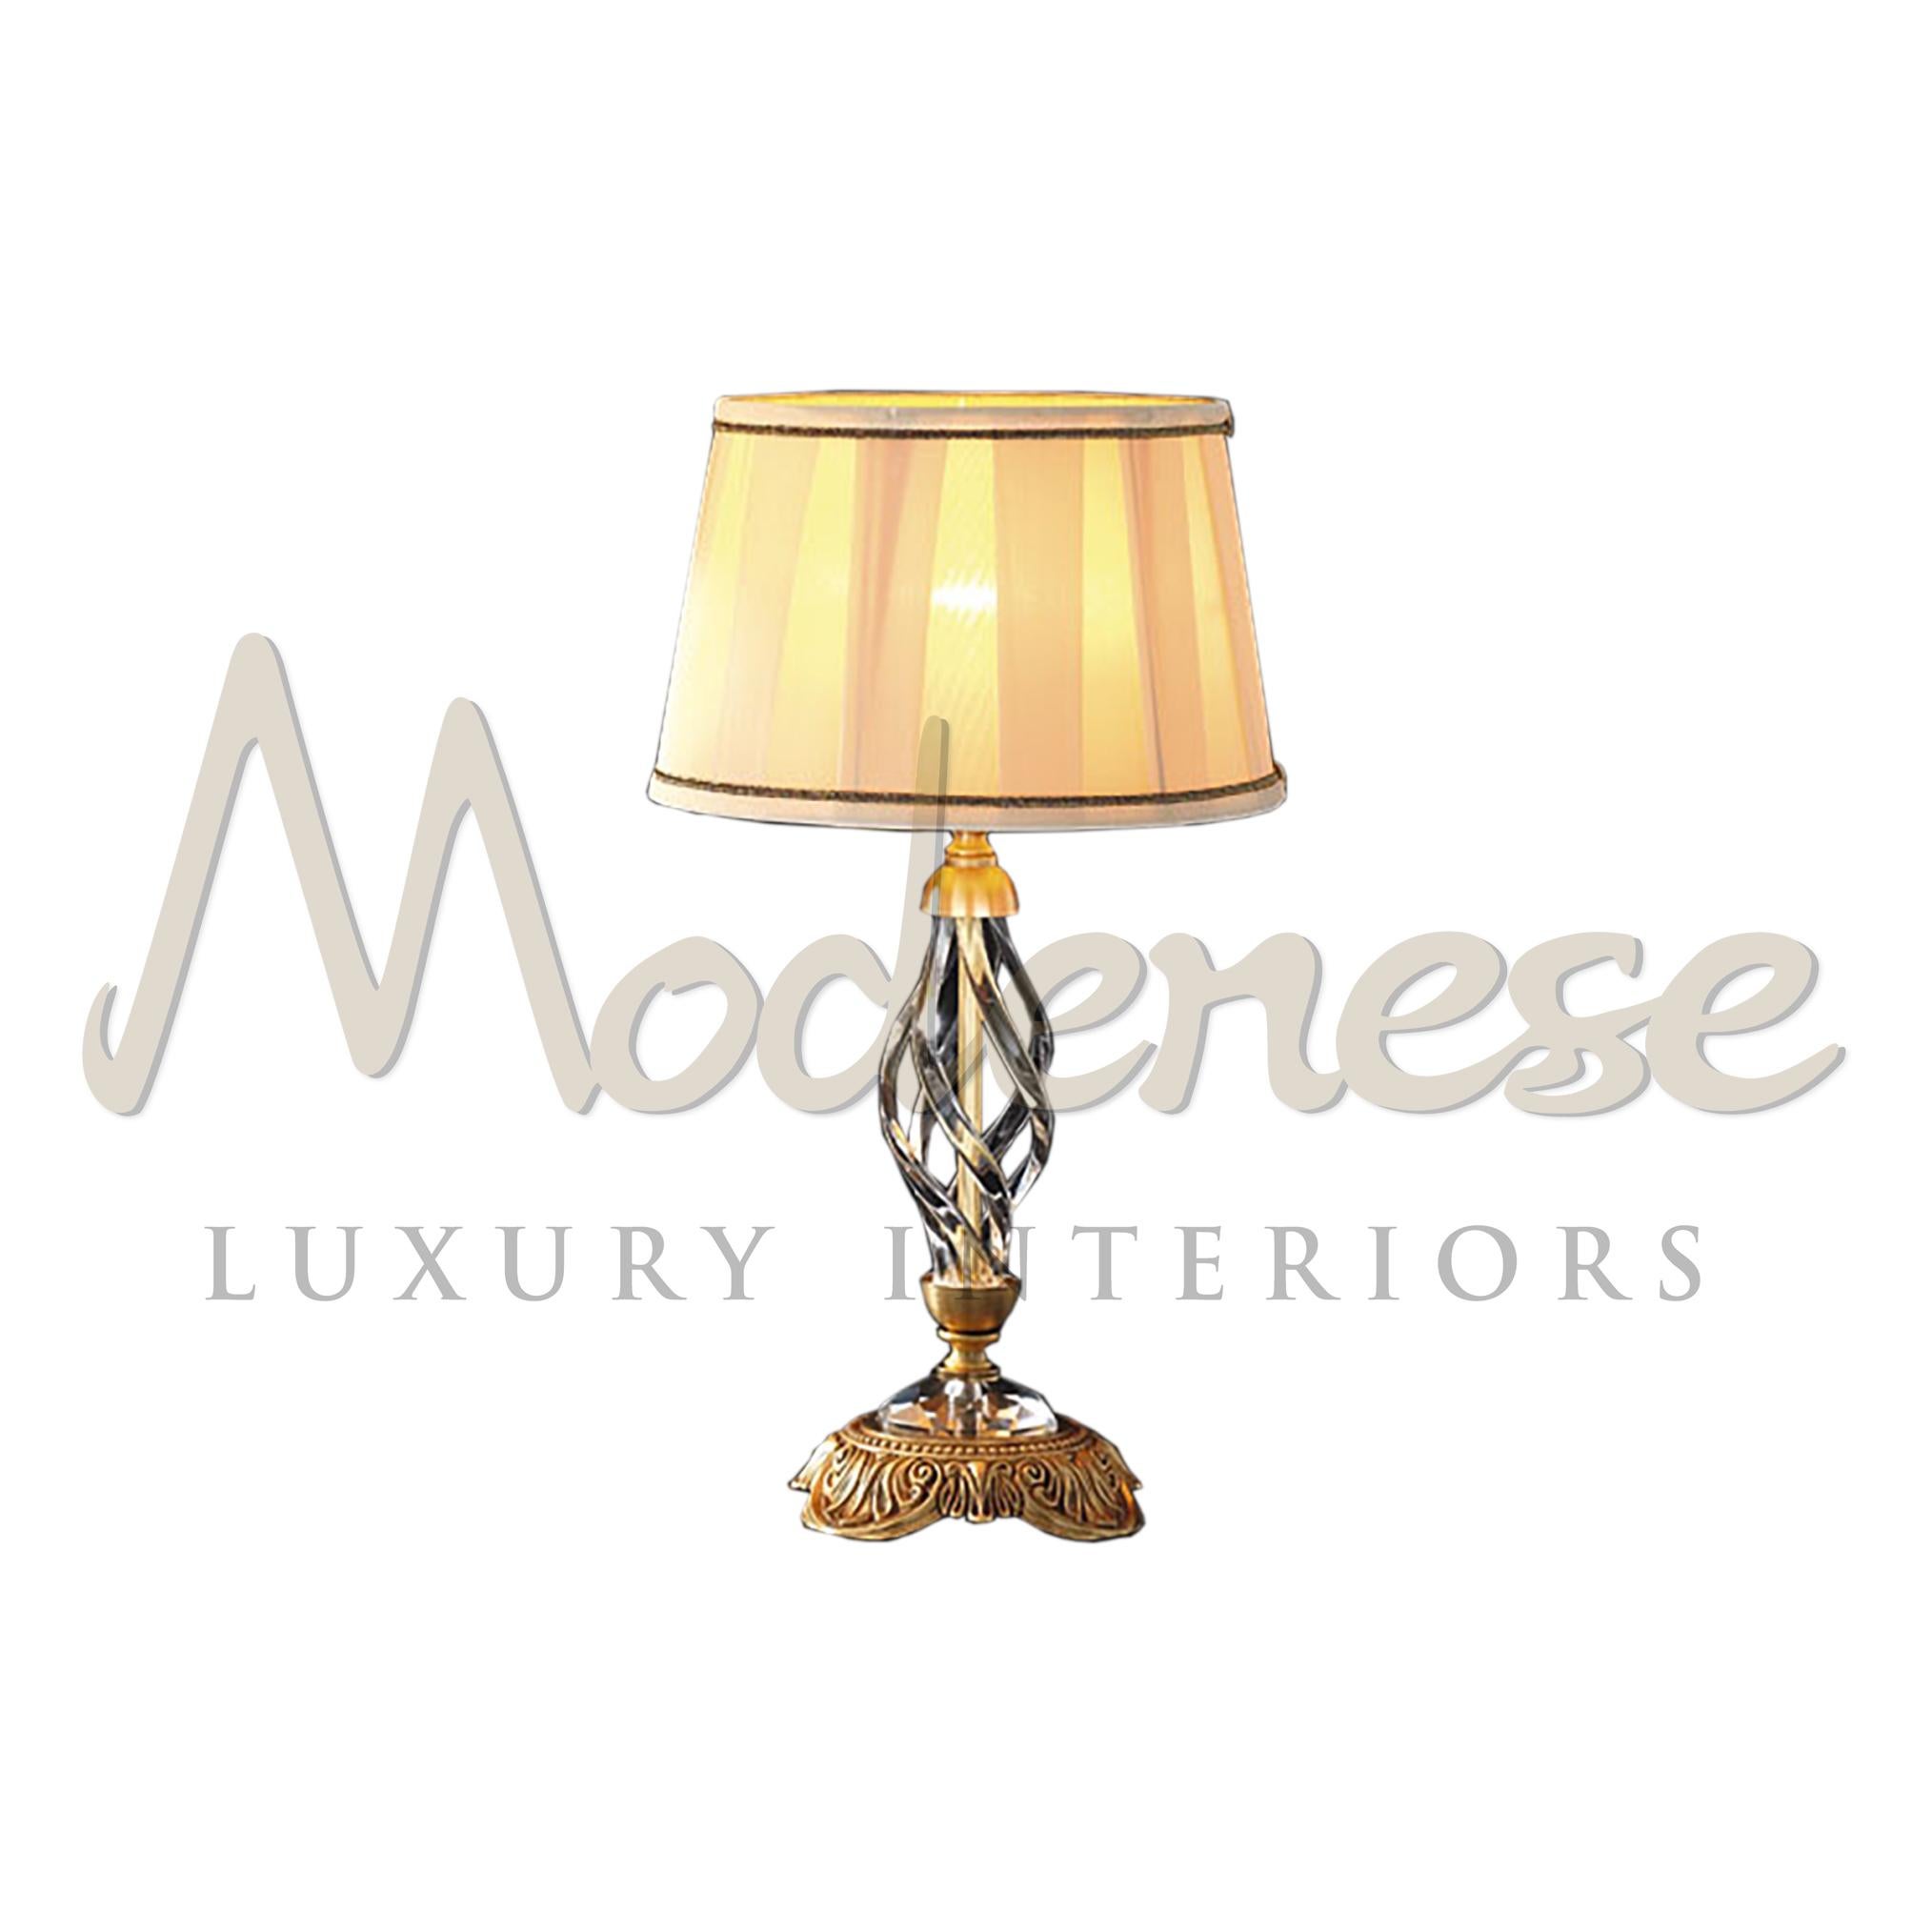 This peculiar gold table light will help you transform any room, enhance a classic style interior or add a unique accent to a fusion space with its metal finish in satin gold and transparent crystals, all customized by Modenese Luxury Interiors.